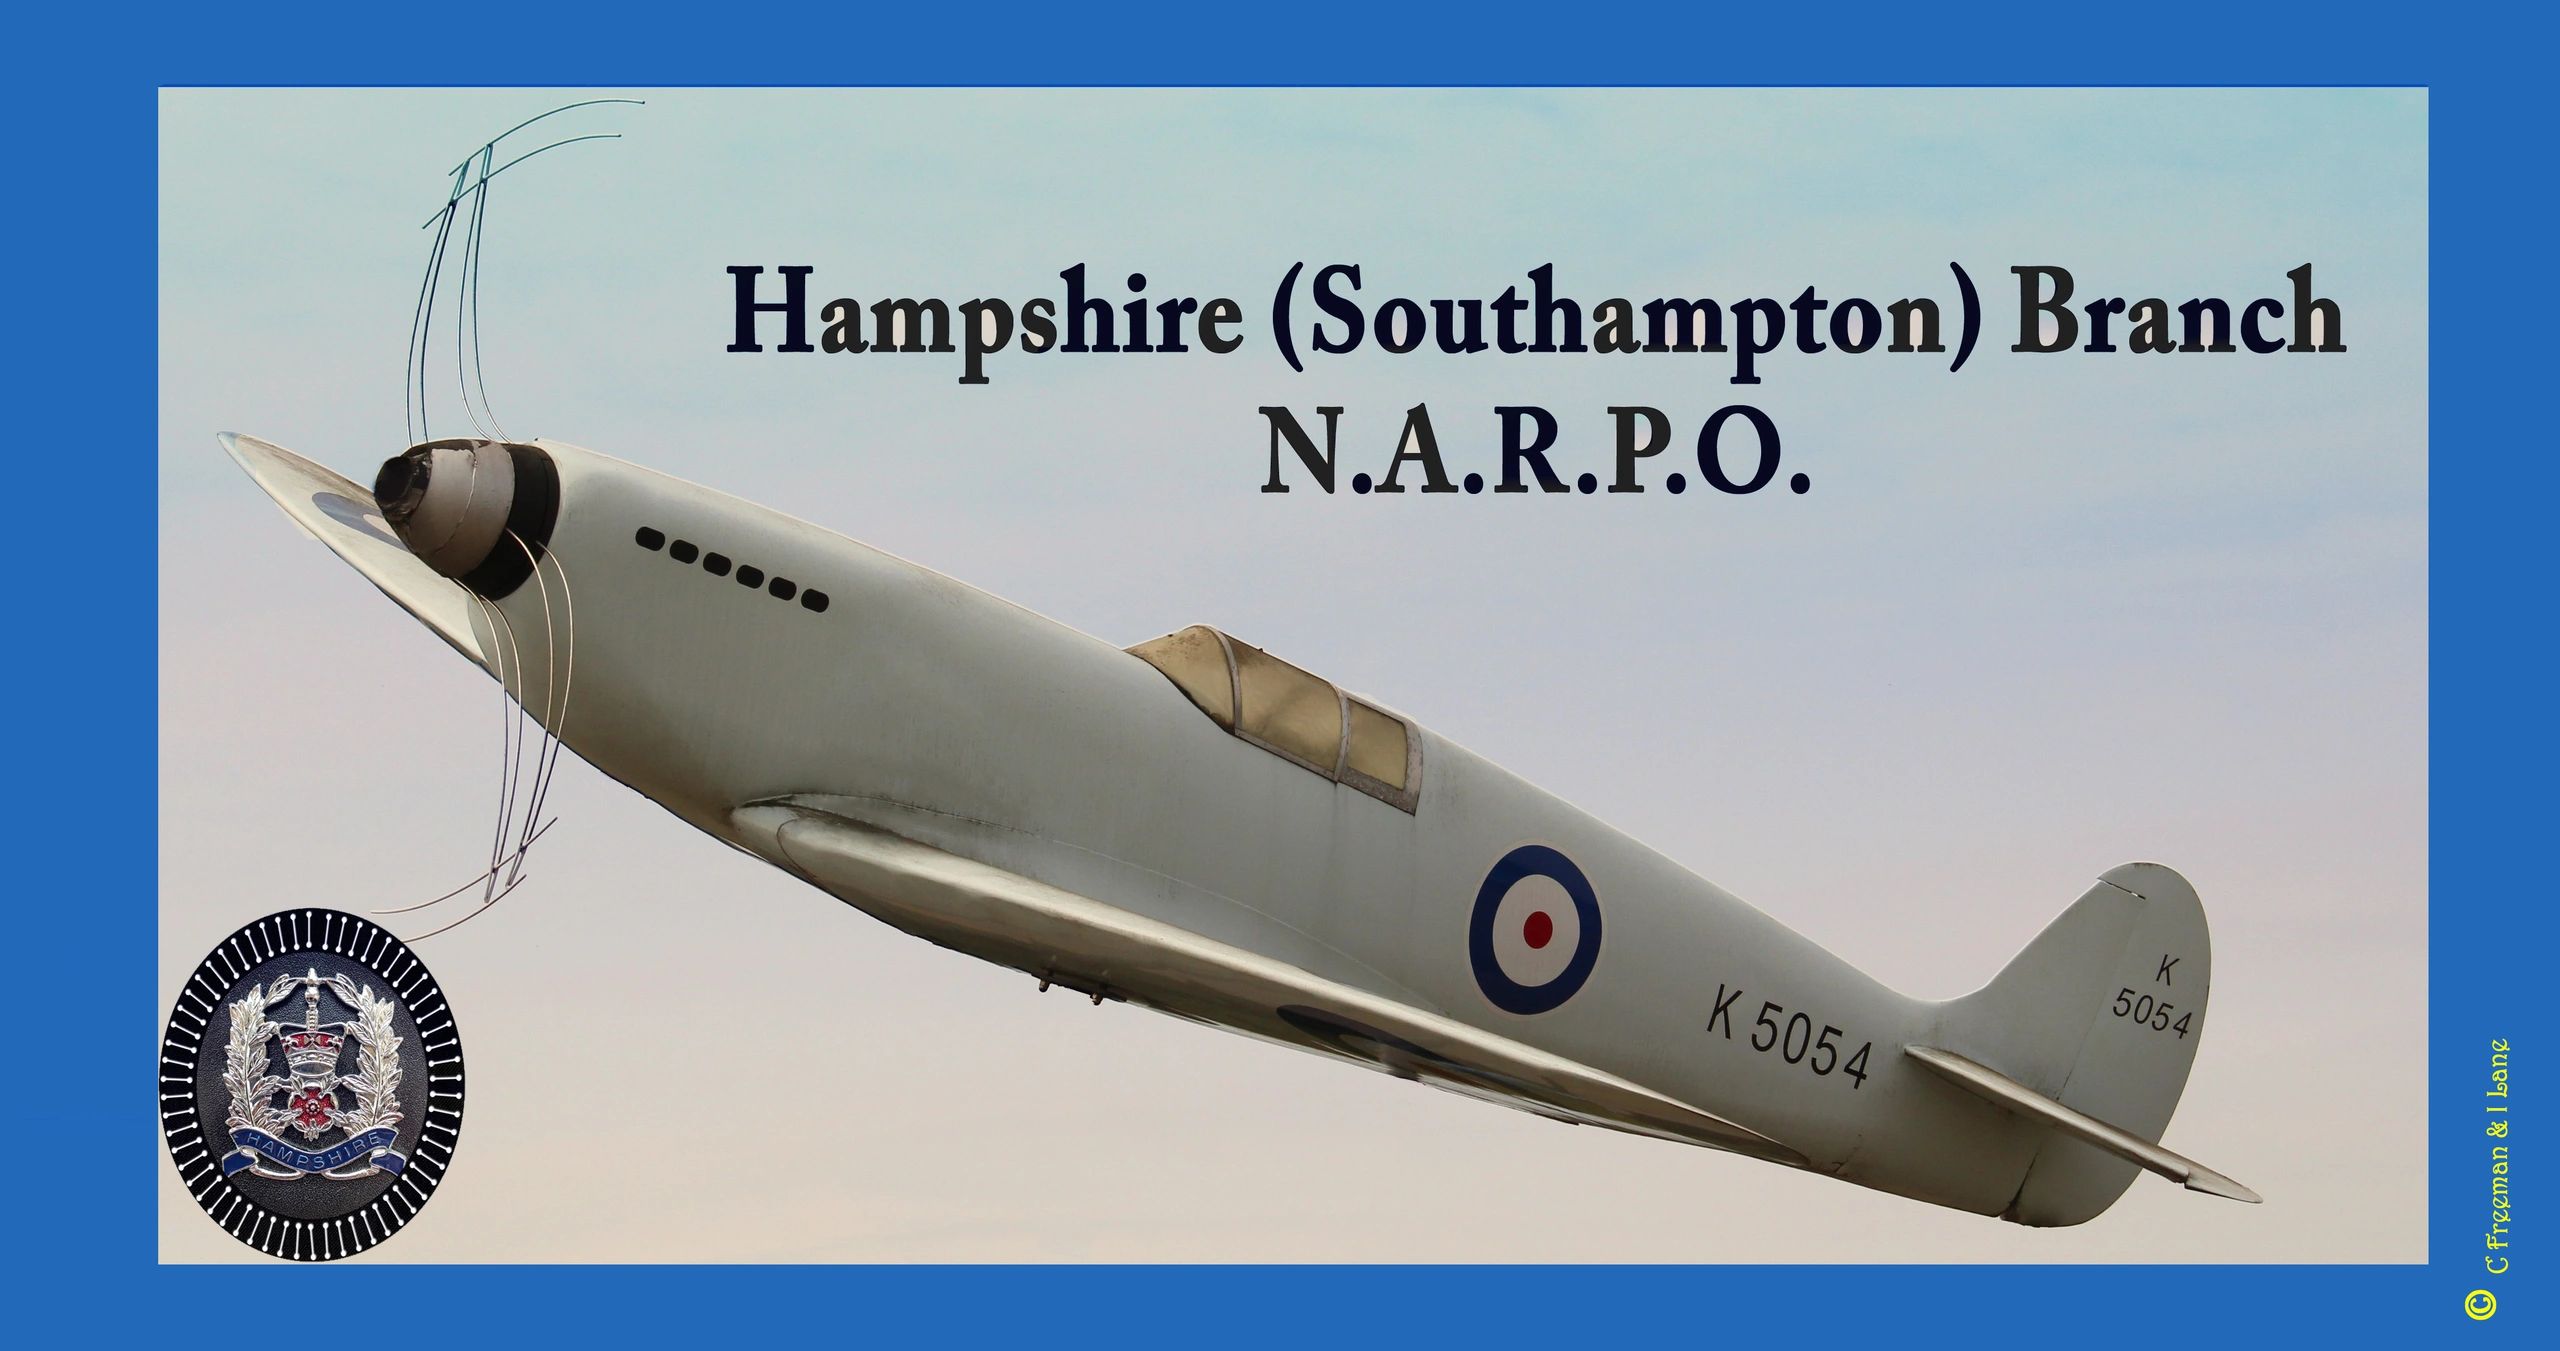 The first Spitfire to fly from Eastleigh (Southampton) Airport tribute composite picture.